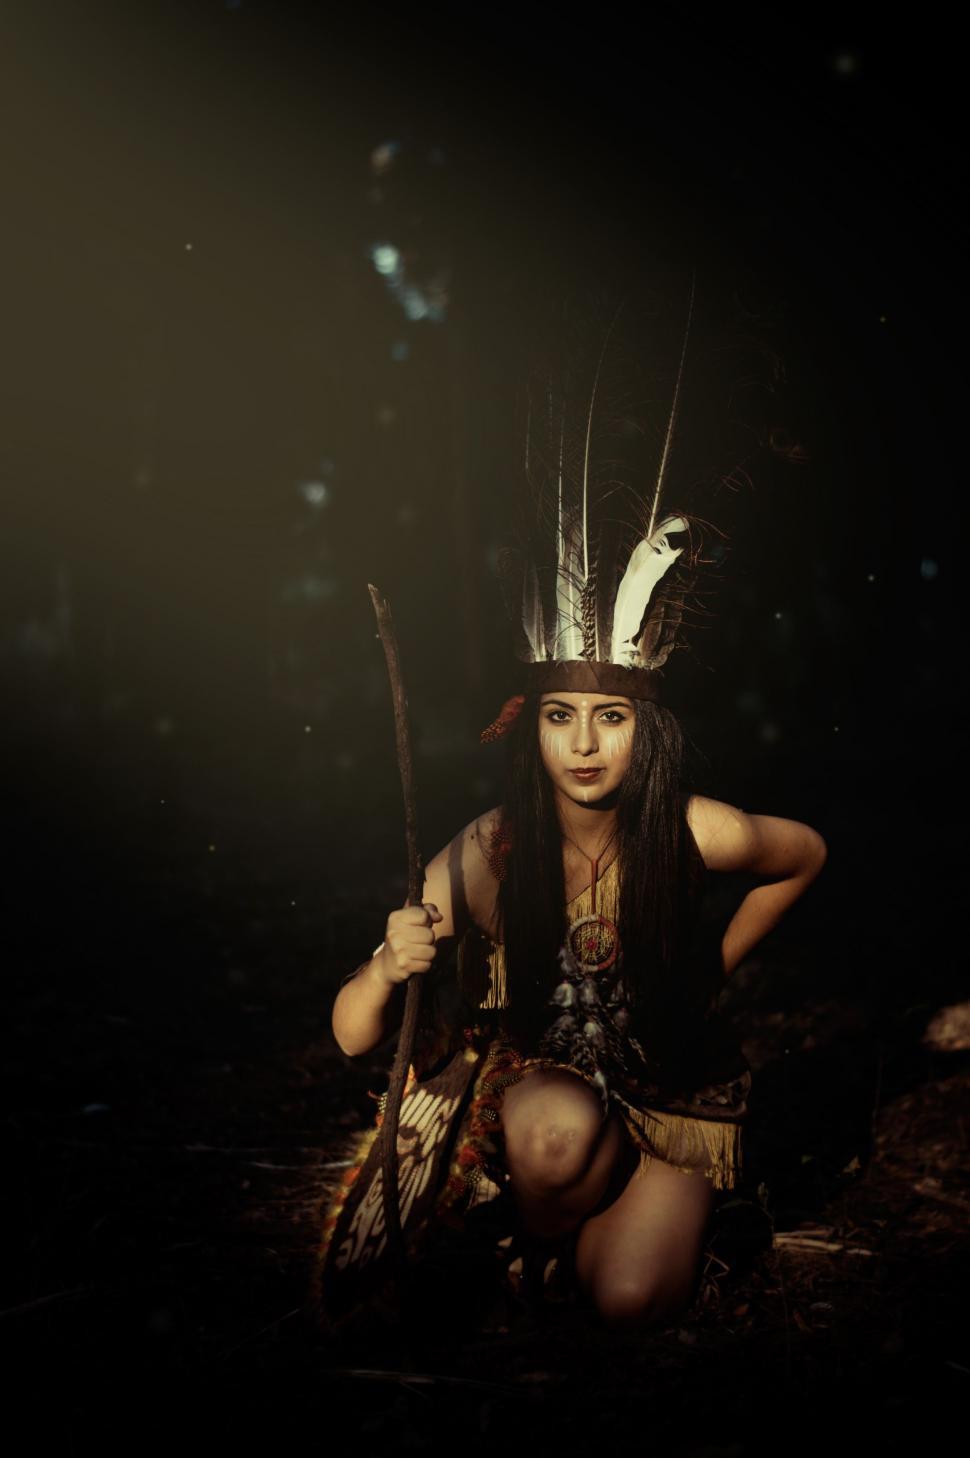 Free Image of Native American Woman Sitting in the Dark 